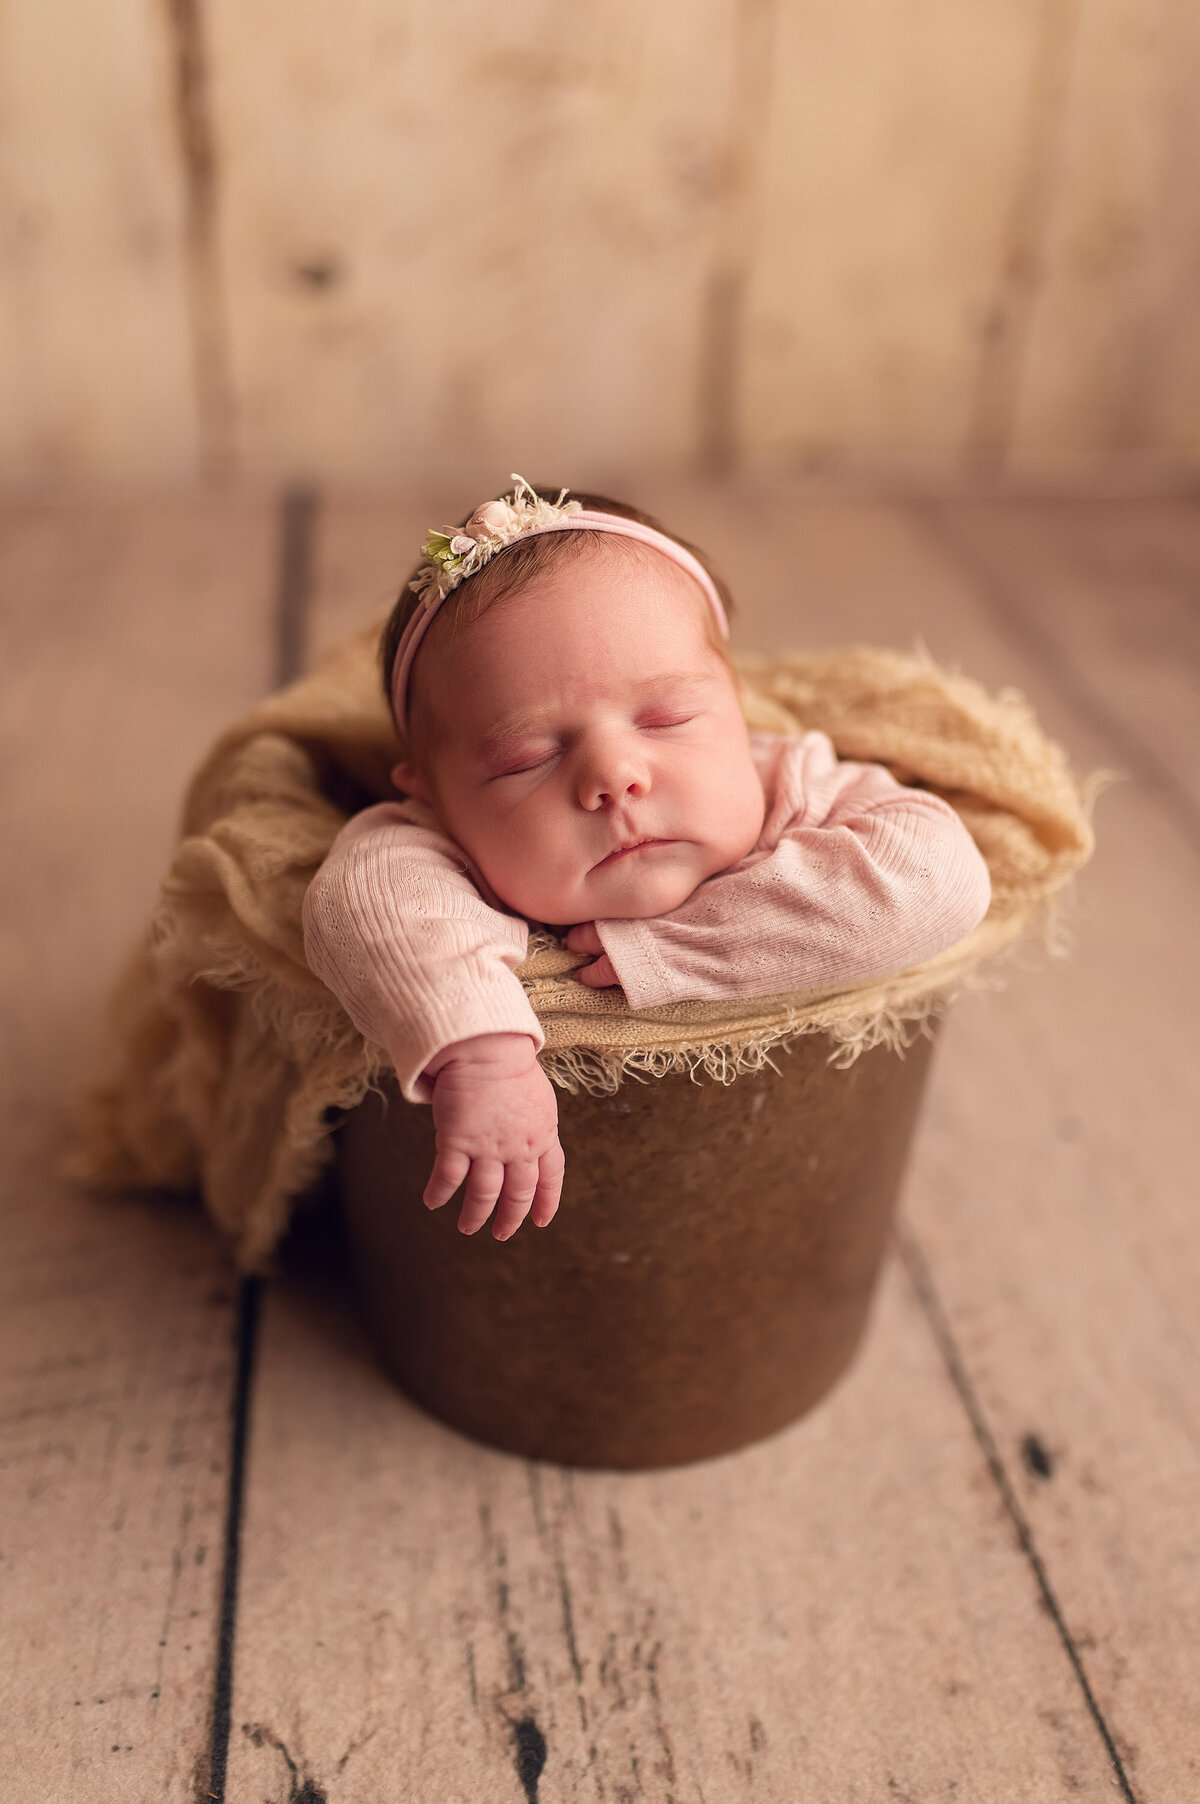 Portrait of baby girl asleep in a brown bucket filled with burlap-like fabric.  Infant was photographed in our Waukesha, WI studio.